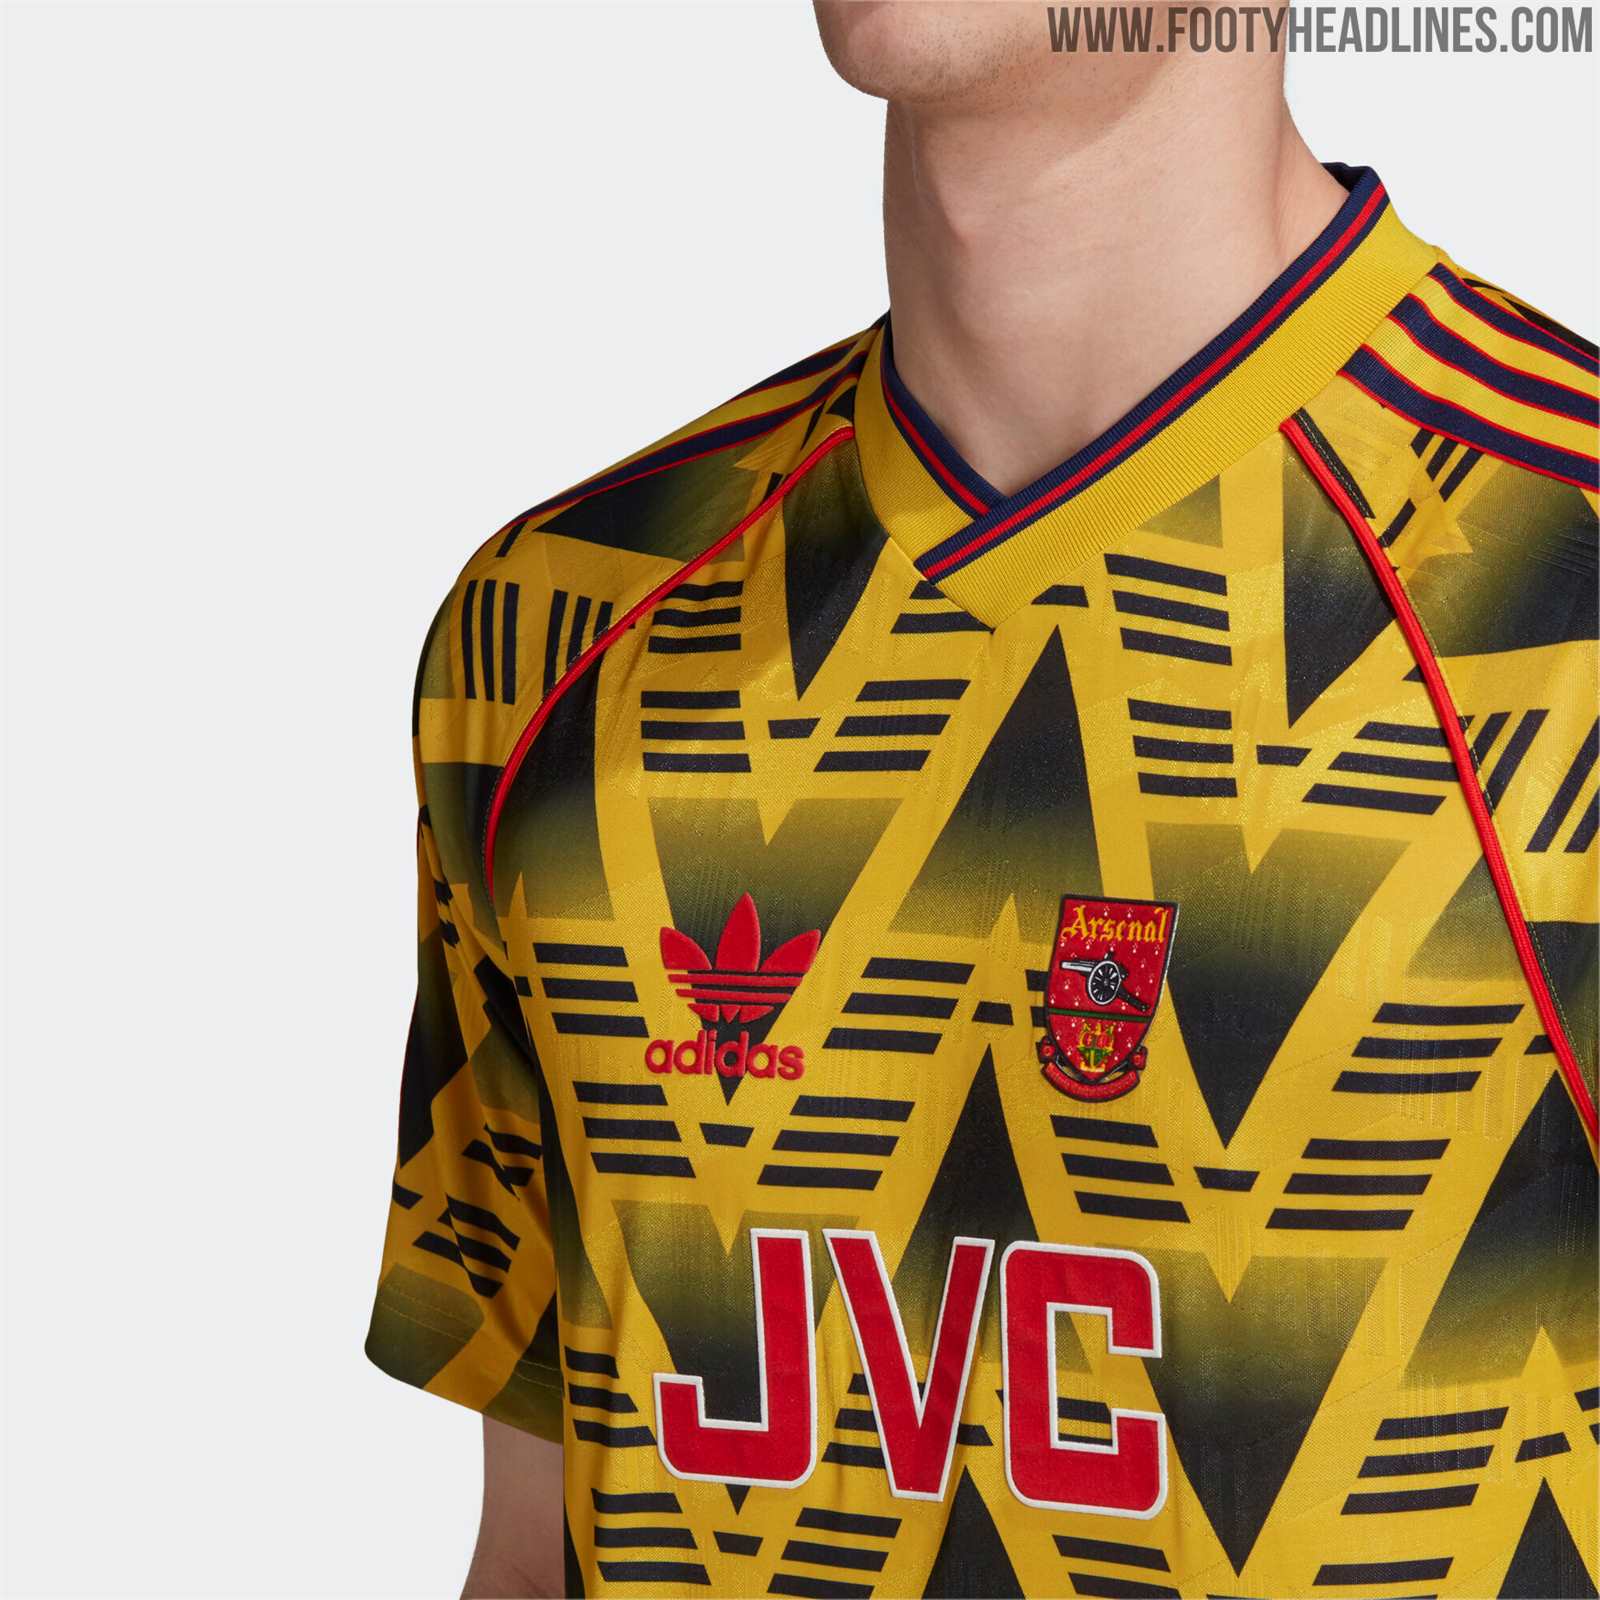 Spectacular Adidas Arsenal Bruised Remake + Retro Collection Revealed - Footy Headlines